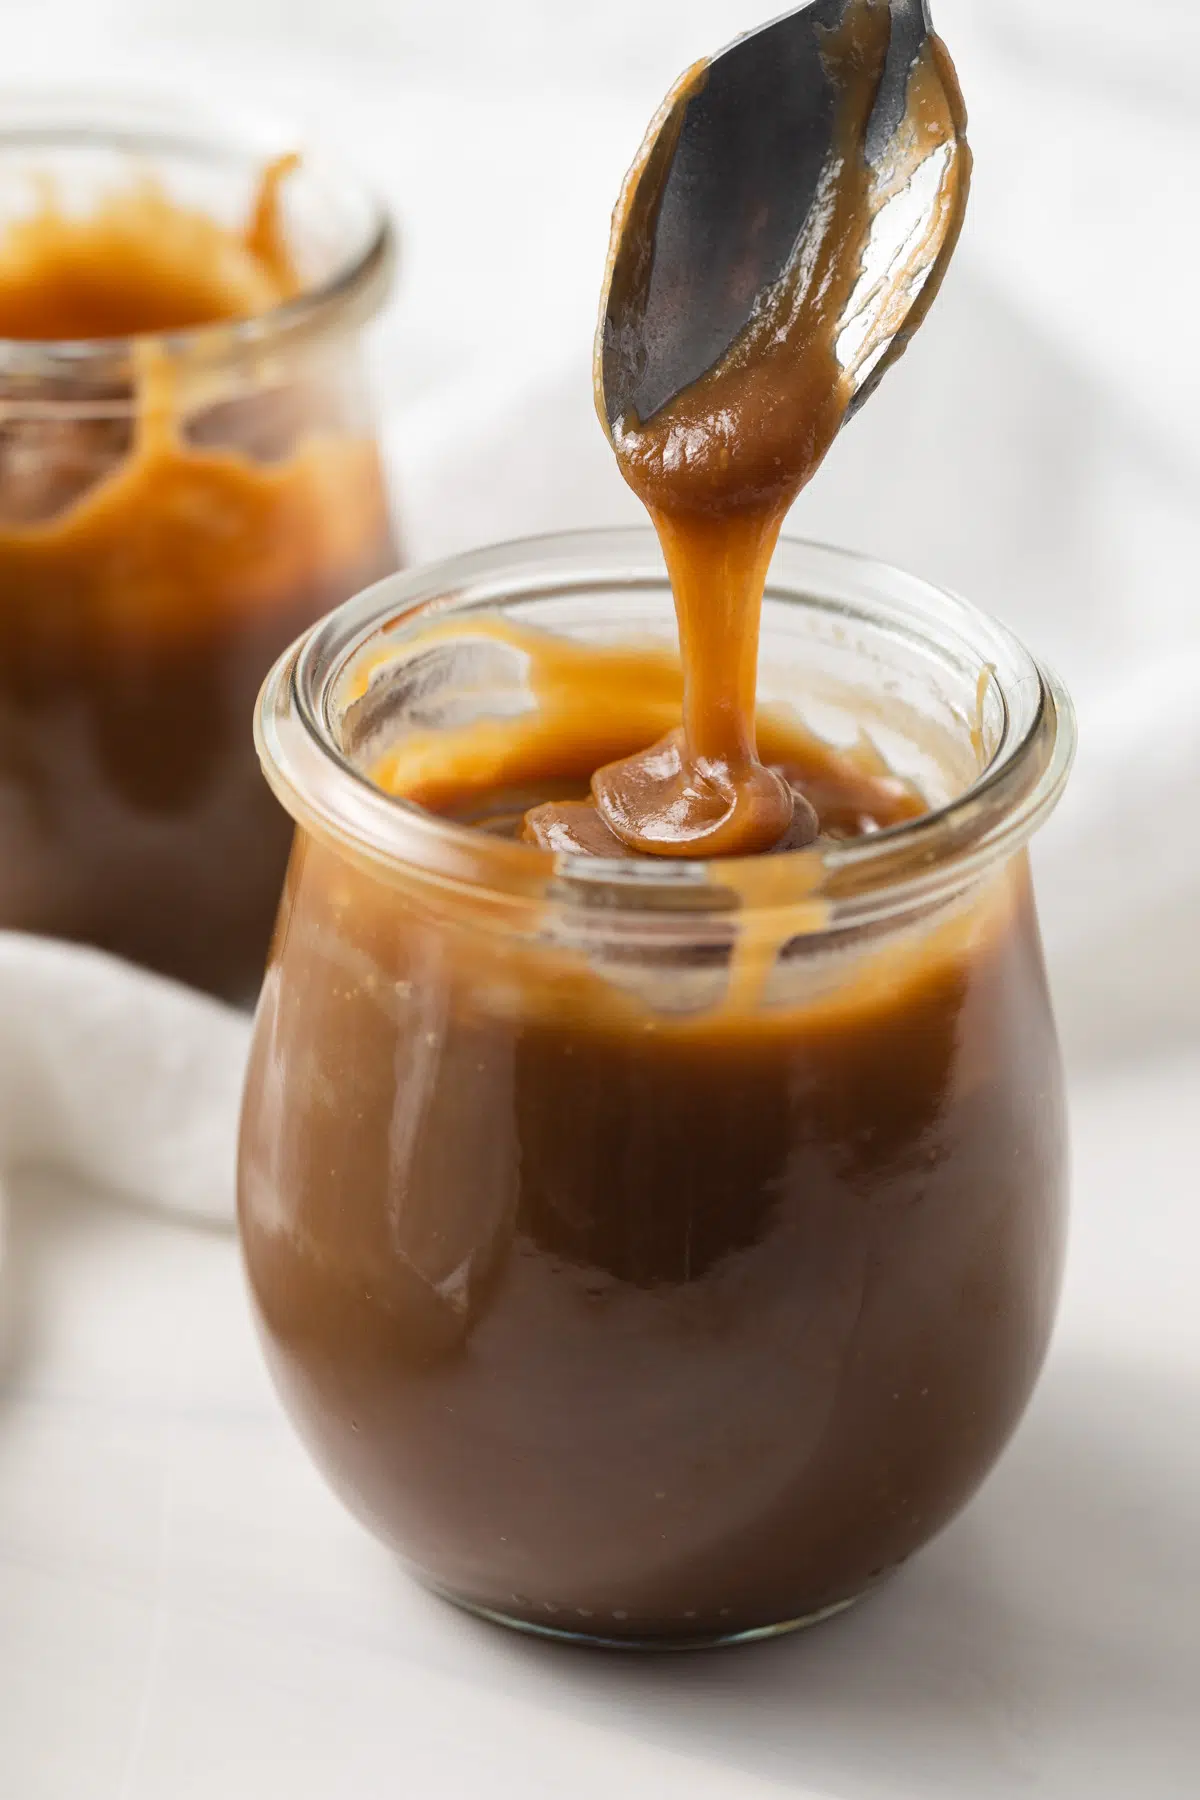 Butterscotch sauce drizzled off spoon into jar.